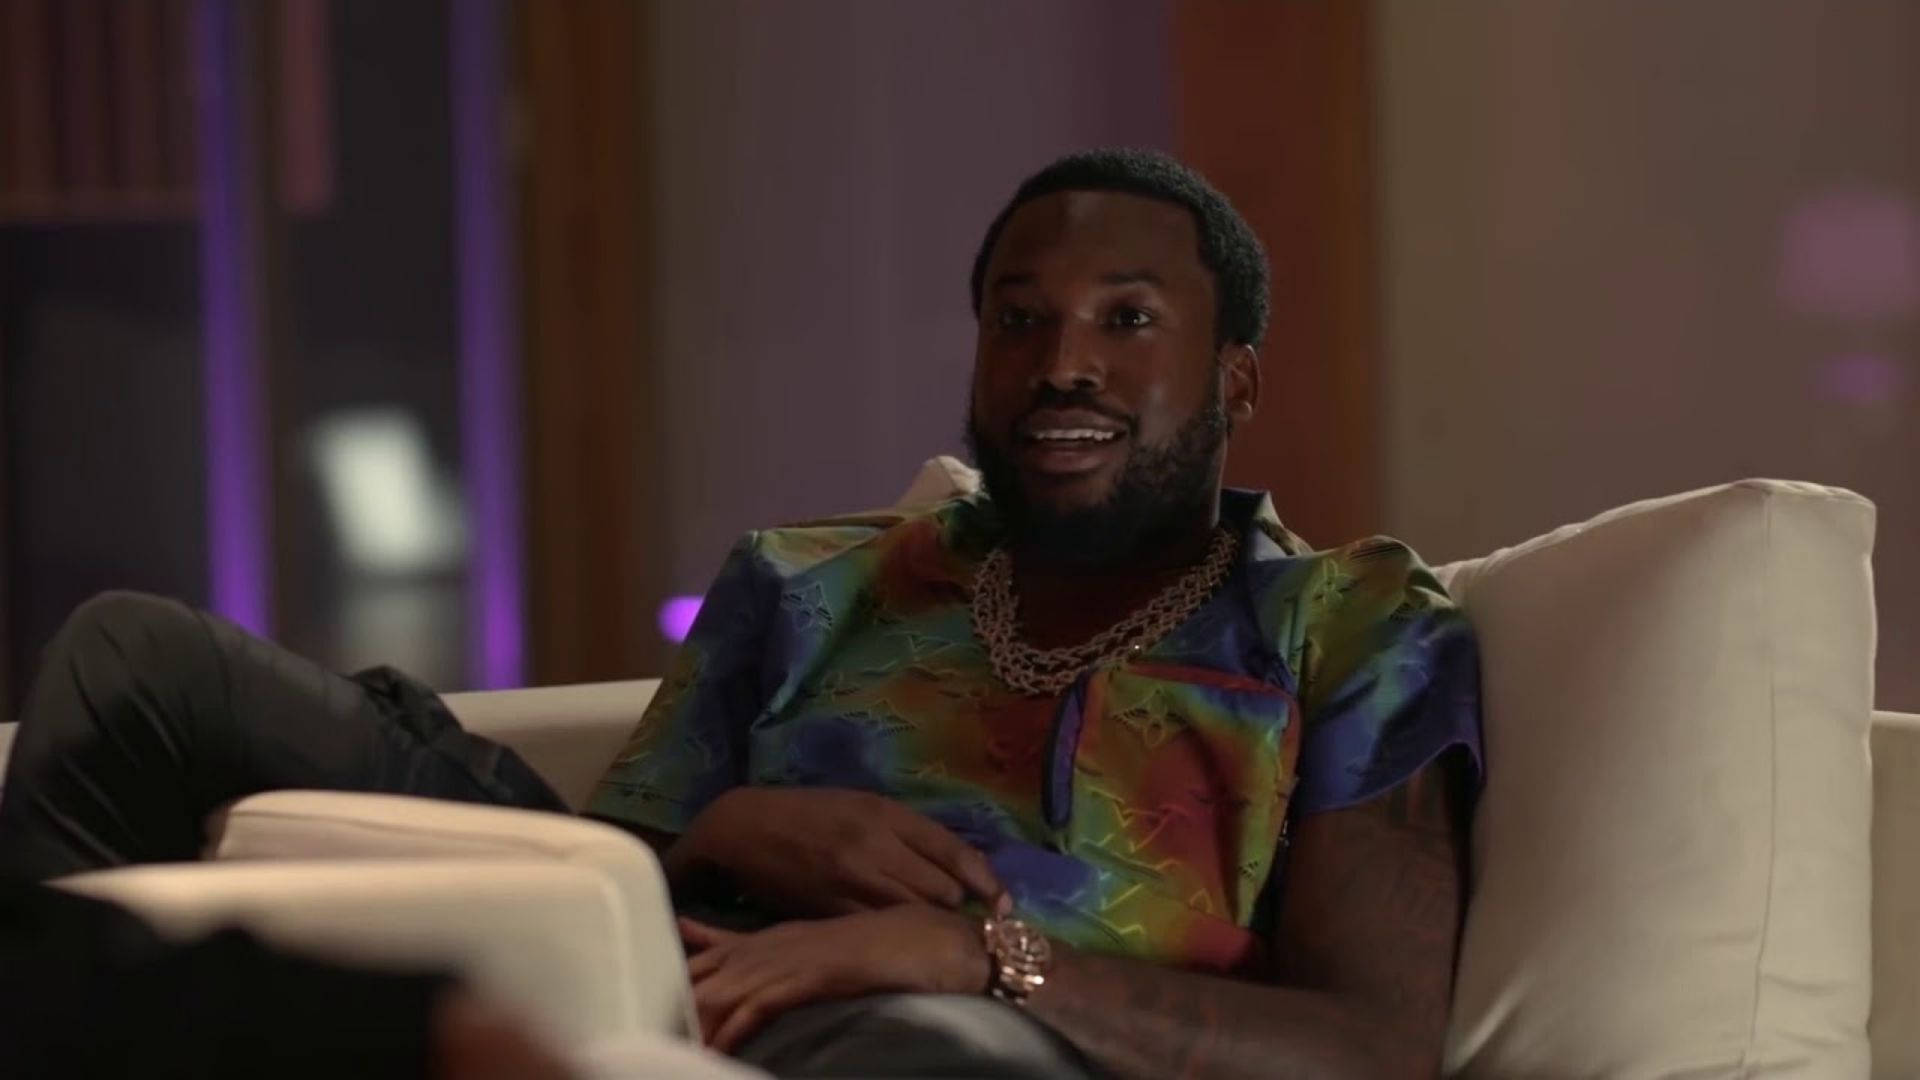 Meek Mill In Colorful Shirt Background